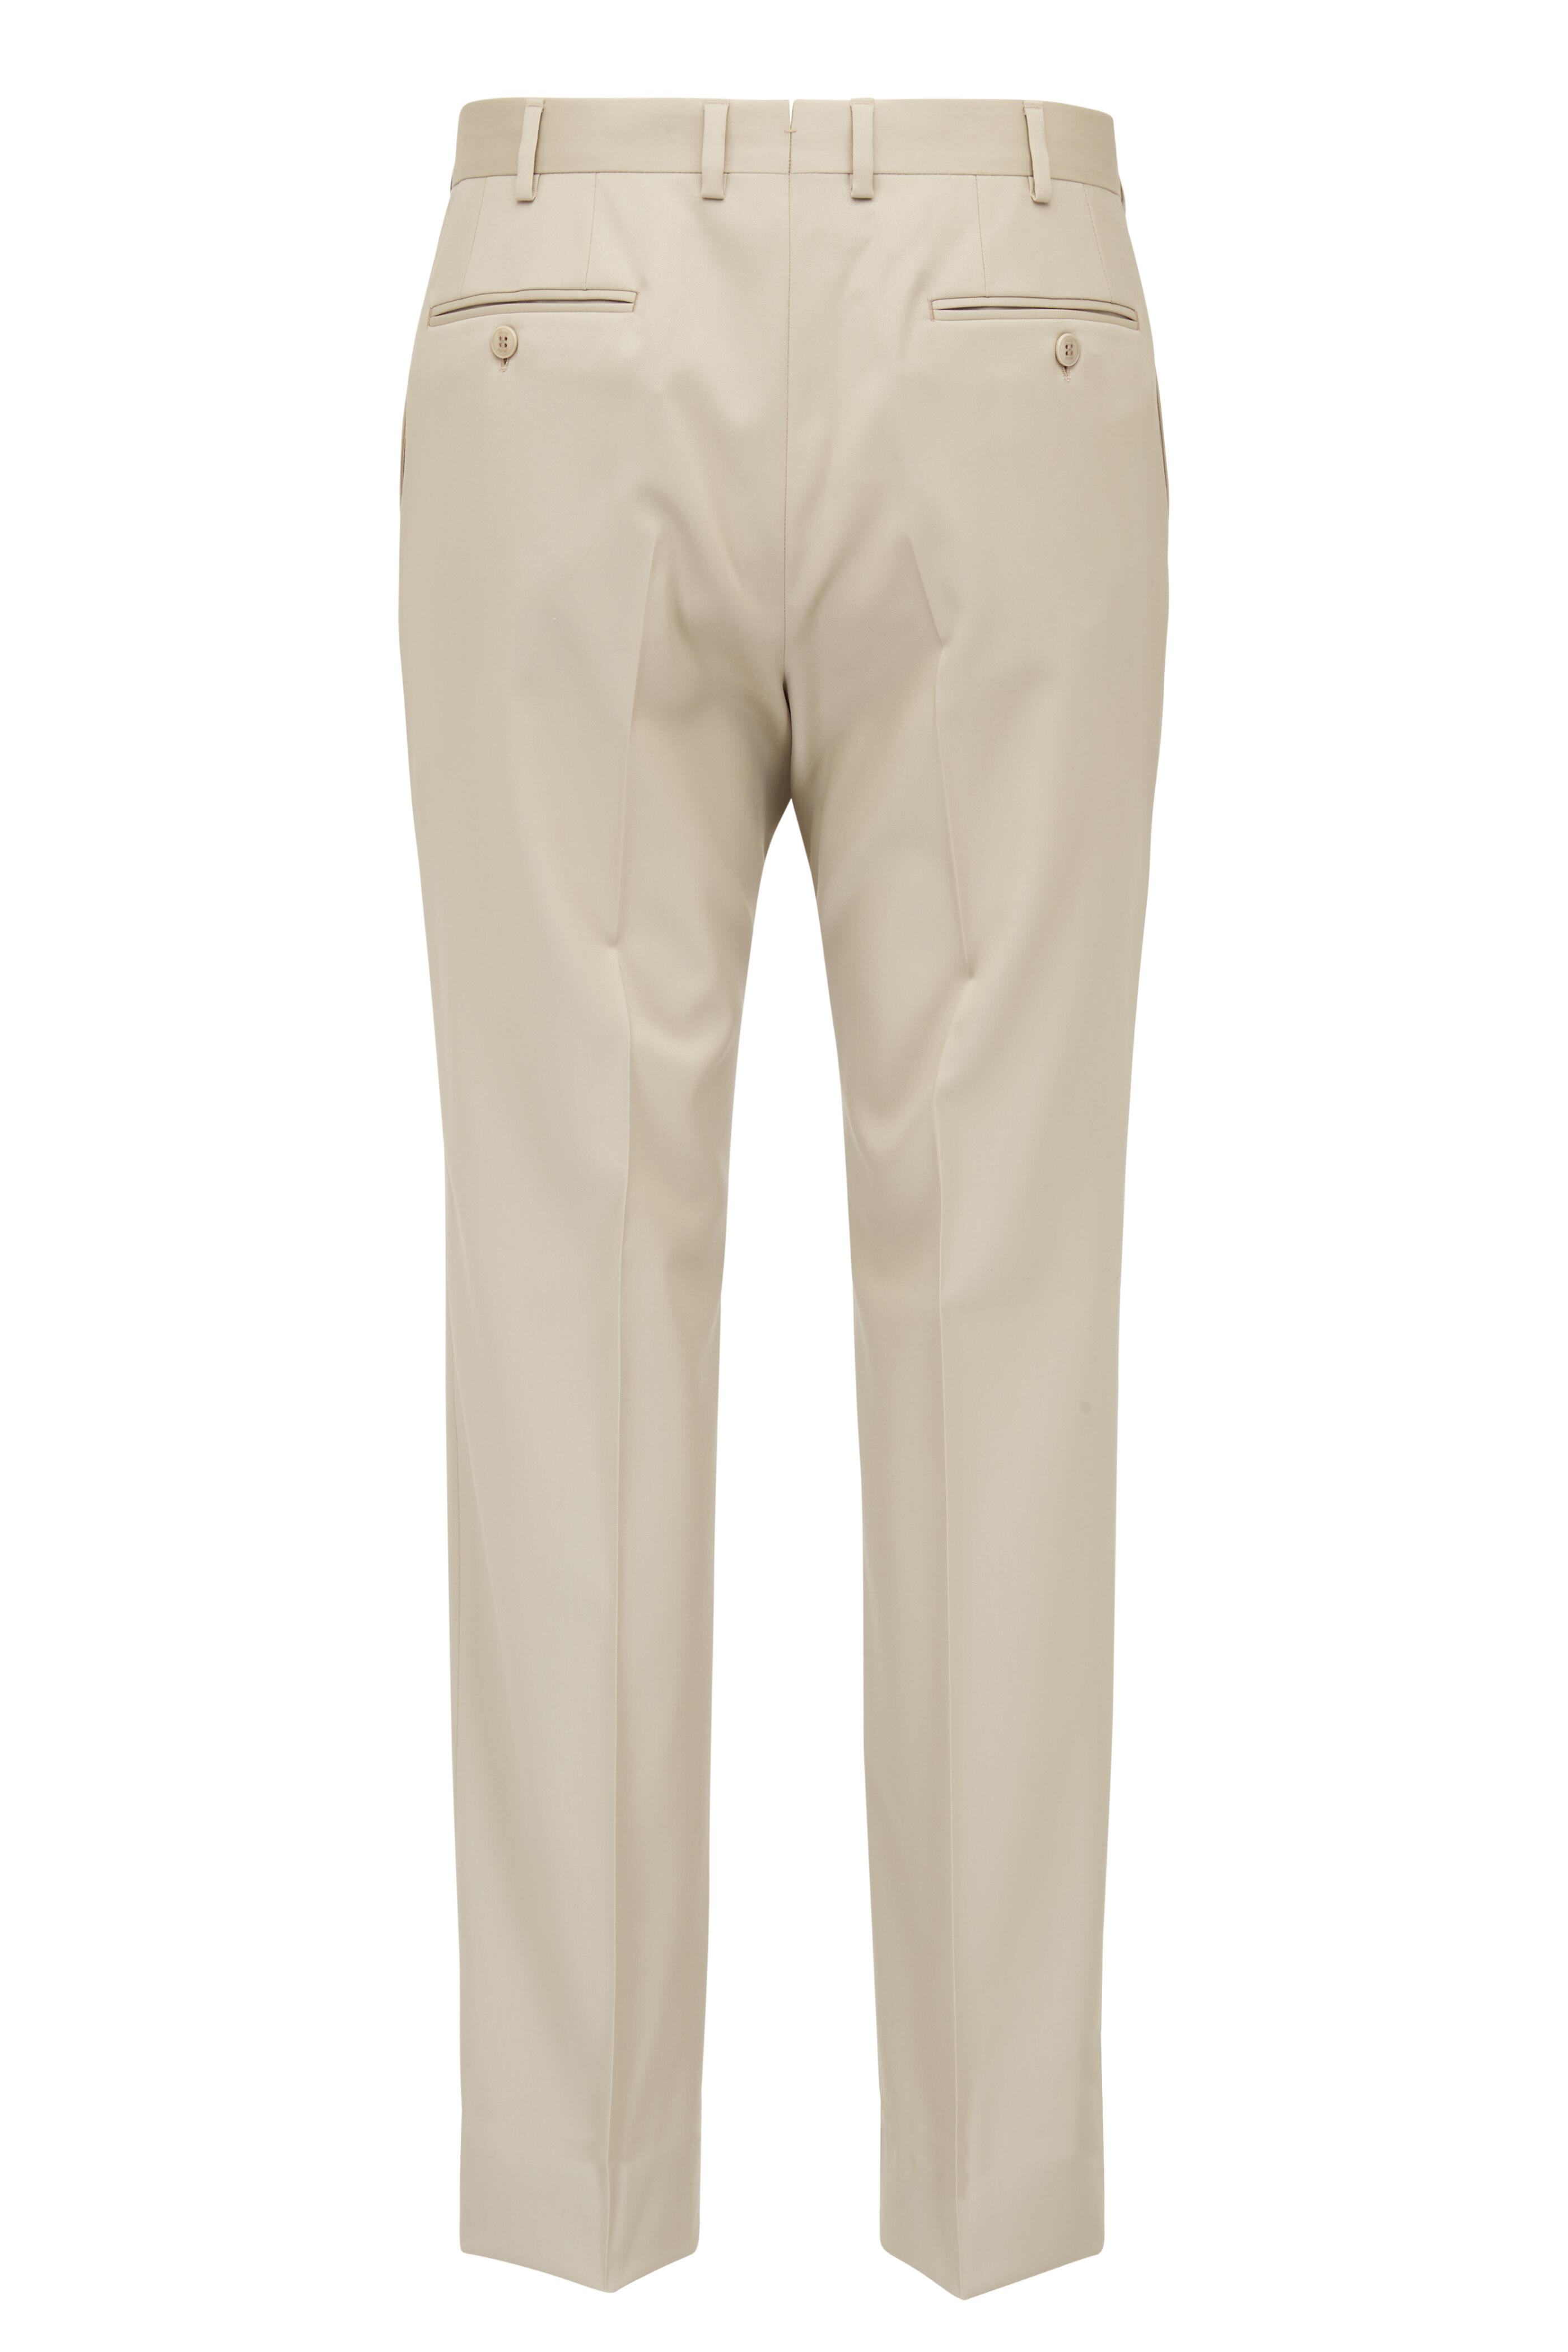 Brioni - Light Tan Solid Pant | Mitchell Stores